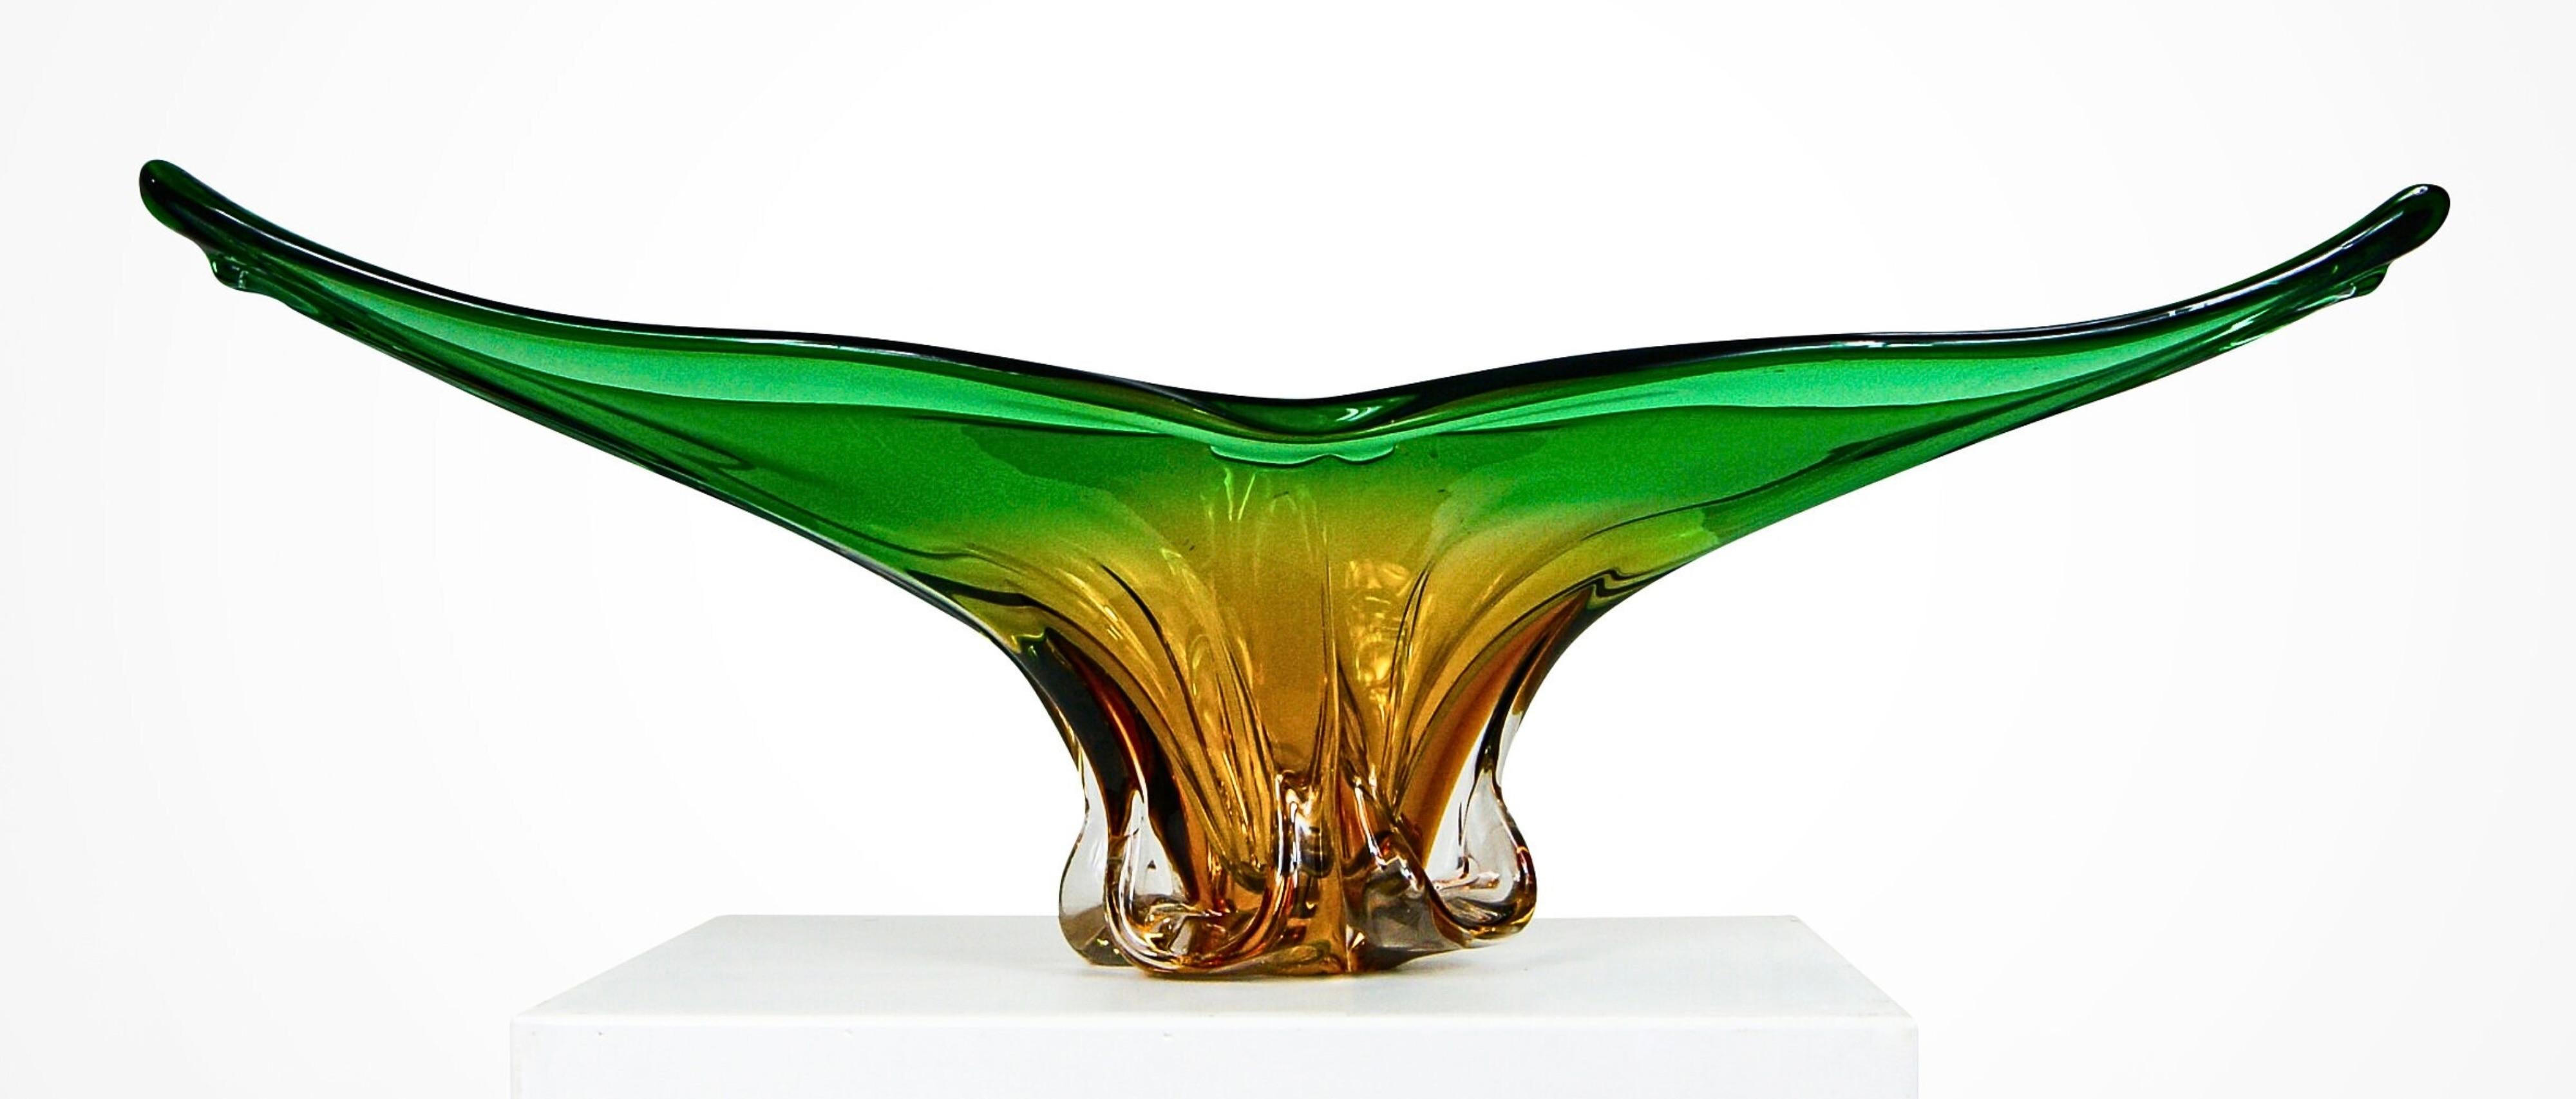 Monumental Murano amber and green sommerso glass bowl and matching vase.
Attributed to Cristallo Venezia circa 1960s.
Exquisite organic form sculptures with a combined pre-packaged weight of nearly 8kgs.
The bowl is a huge gondola shaped amber and